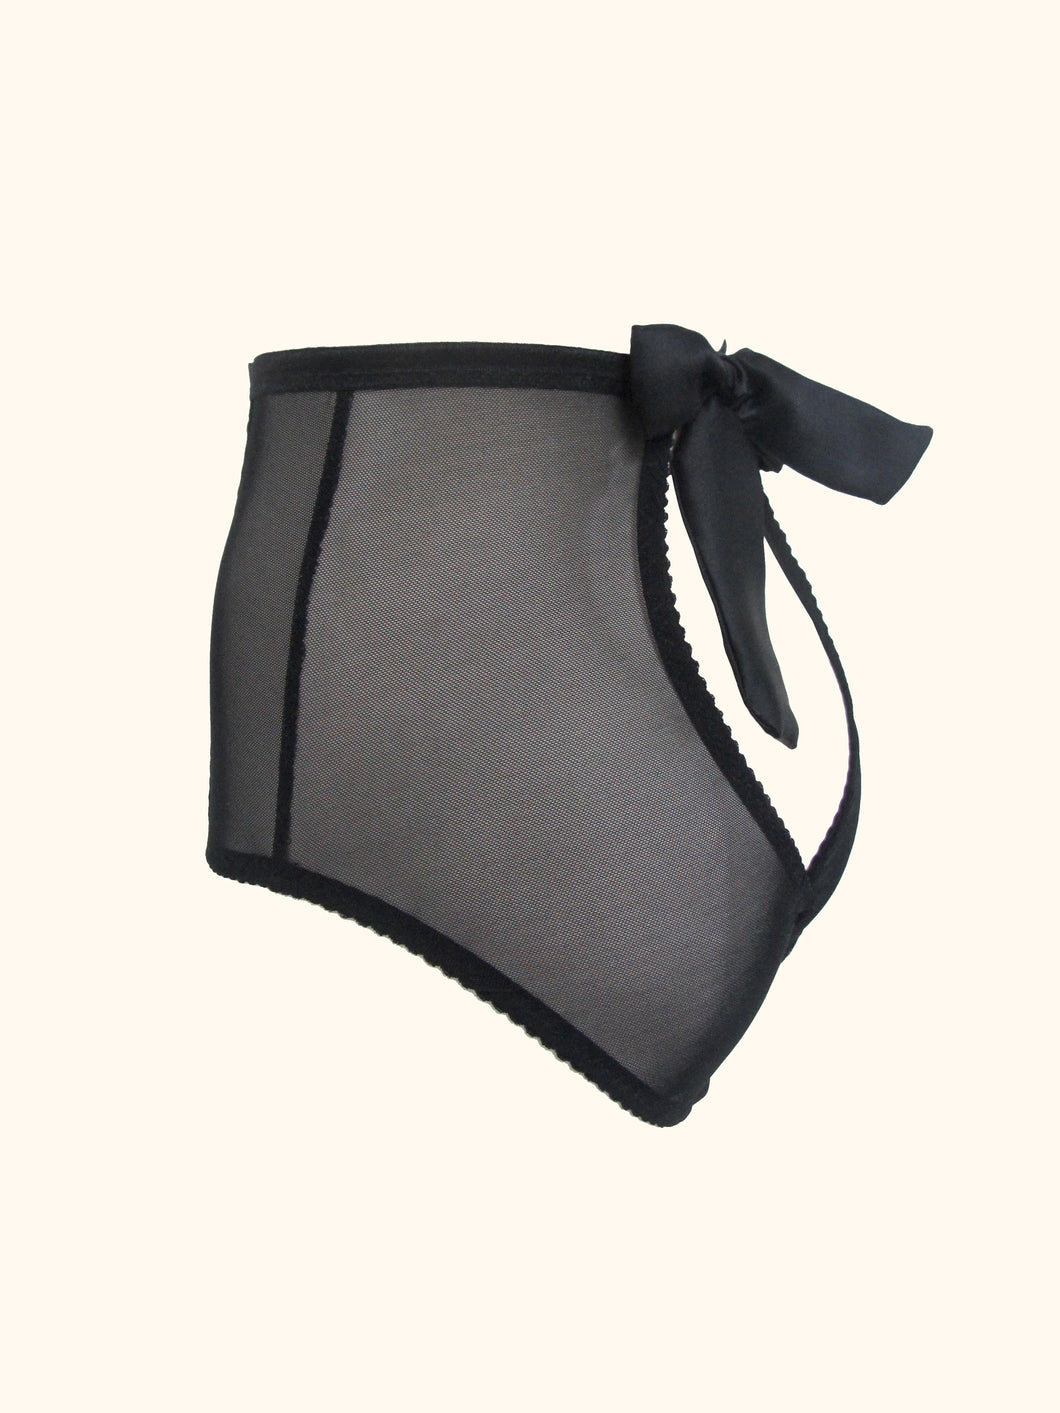 The back of the Serena open back knickers. There is a bow at the waist in the centre that fastens the knickers. The back panels over lap at the base and reveal the top of the bottom. All visible panels are made from black sheer mesh.